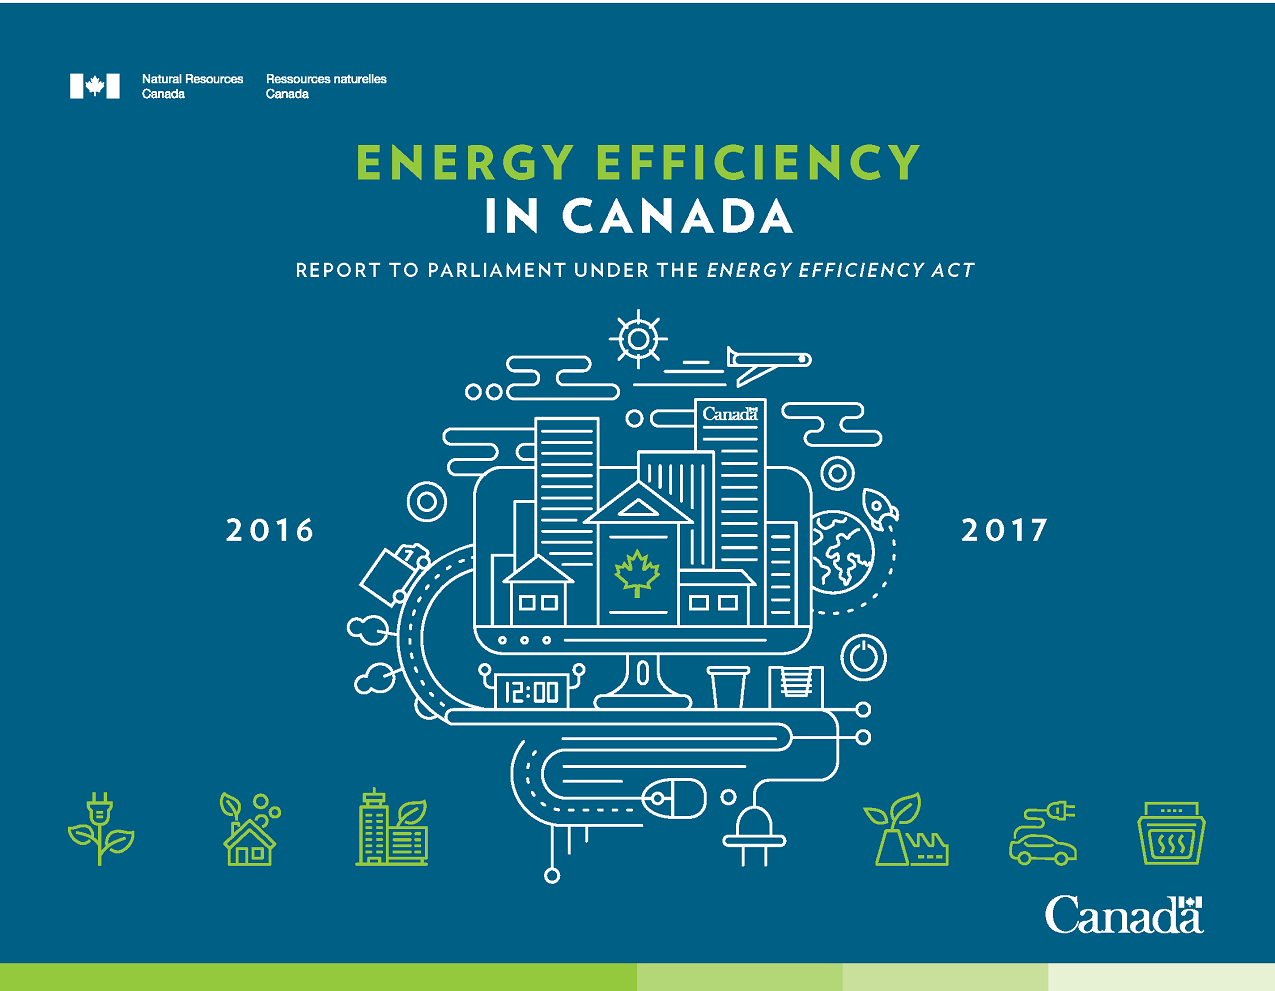 IMPROVING ENERGY PERFORMANCE IN CANADA: REPORT TO PARLIAMENT UNDER THE ENERGY EFFICIENCY ACT, 2016-2017